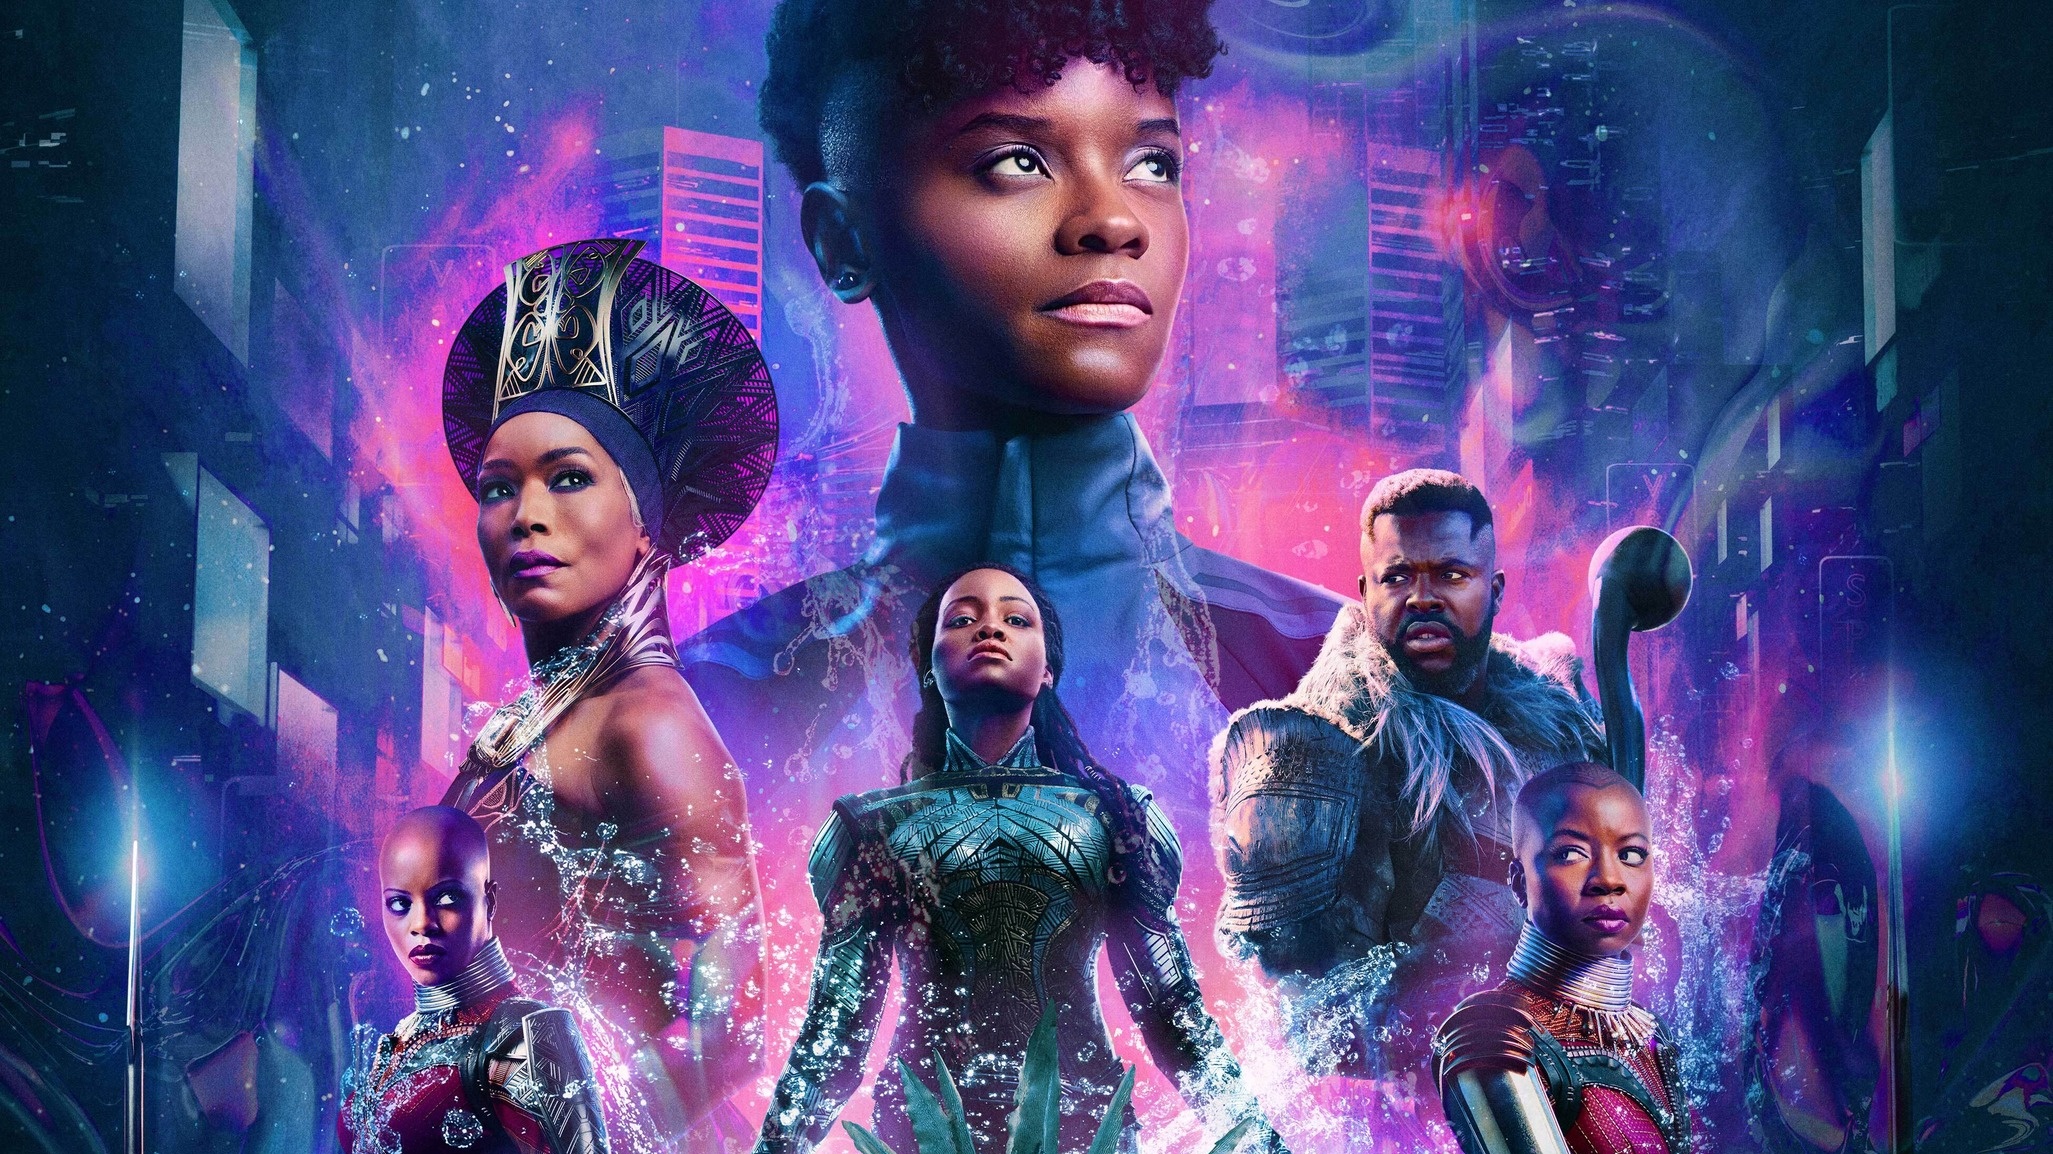 How to Watch 'Black Panther: Wakanda Forever': Stream It on Disney+